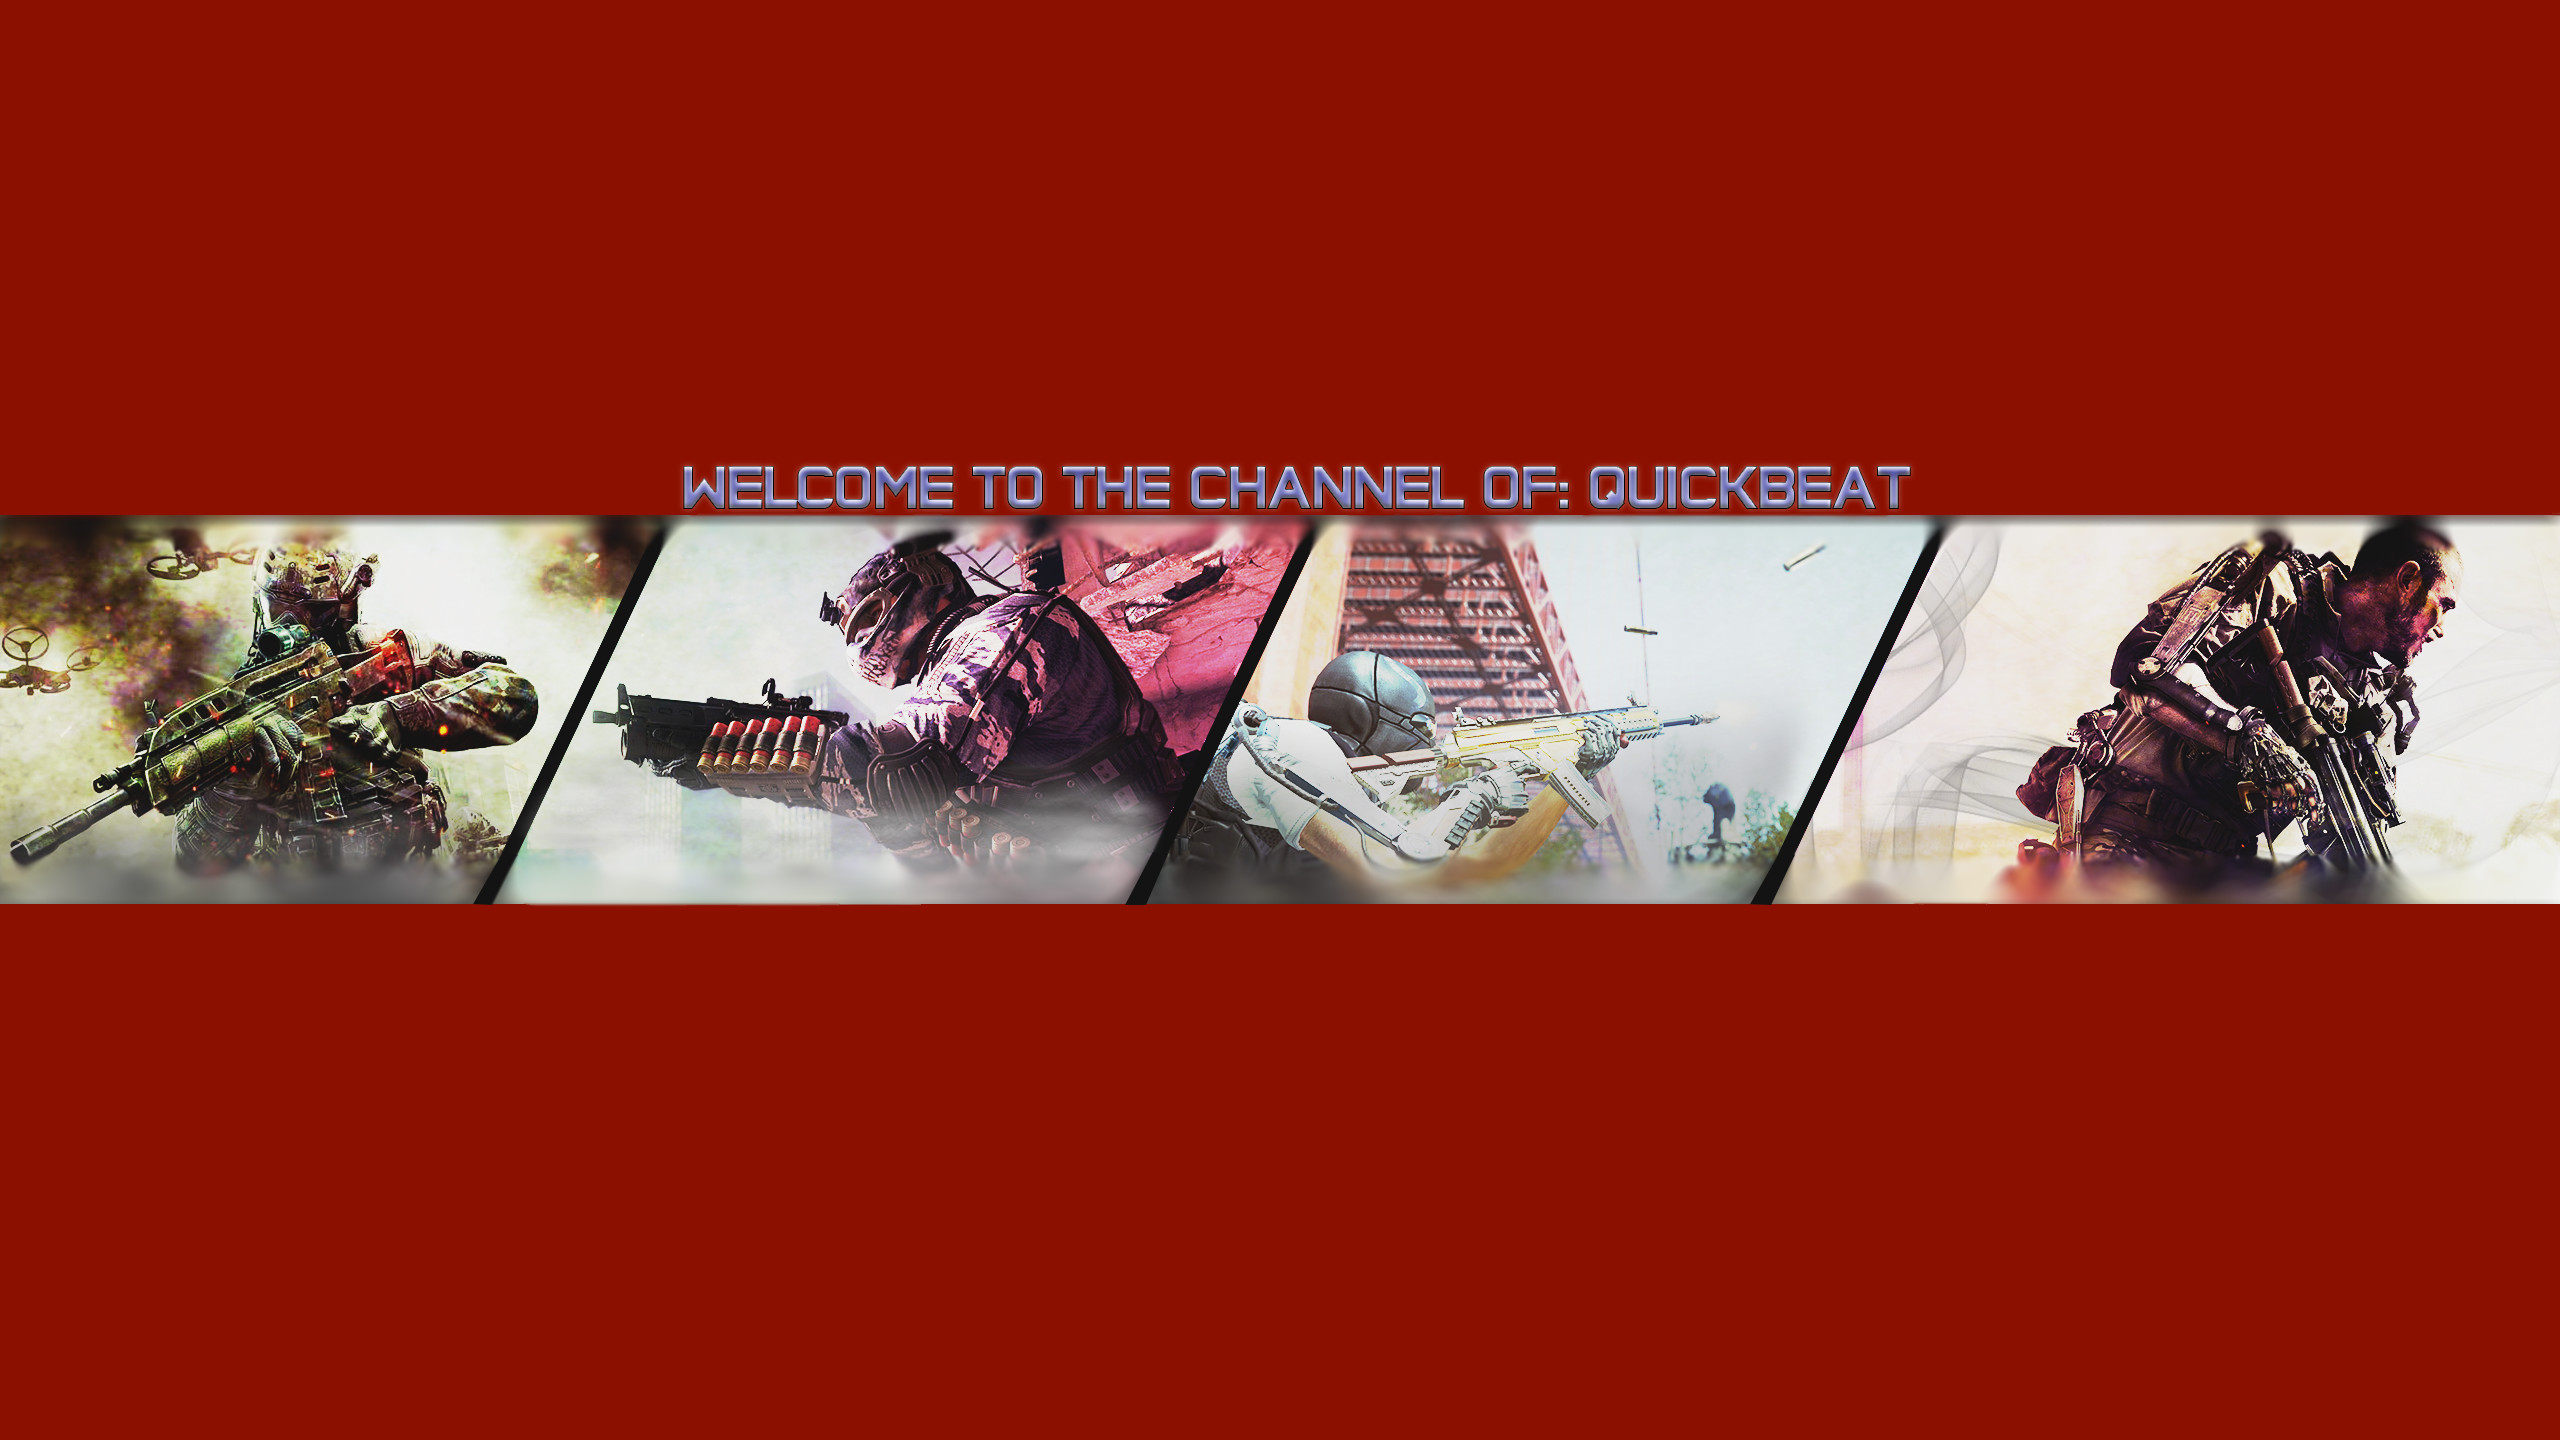 Call of duty youtube banner by QuickBeat on DeviantArt